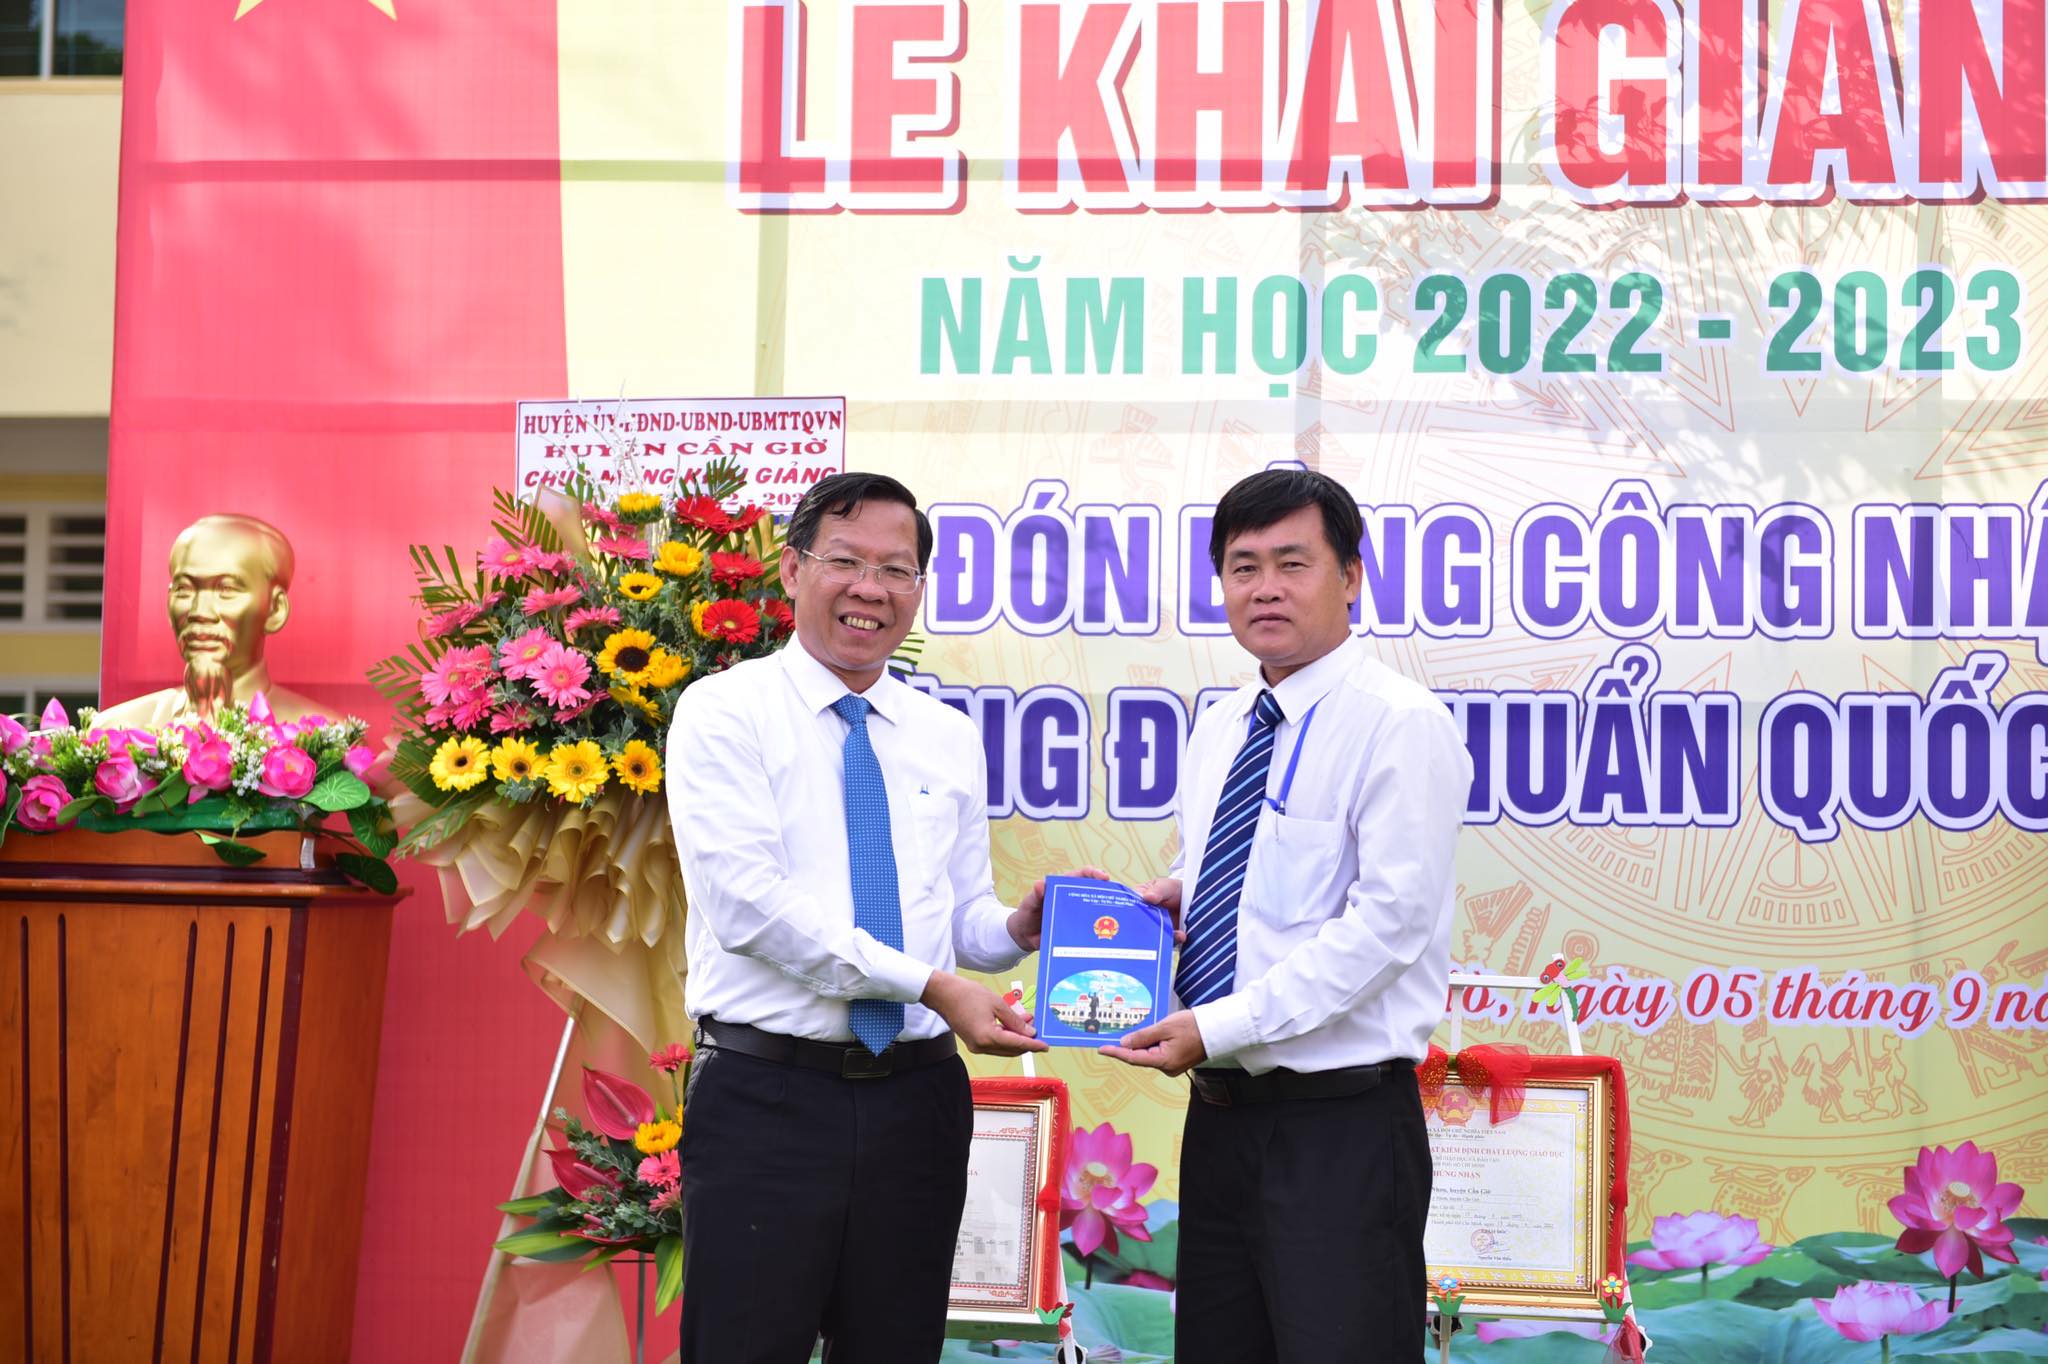 Chairman of the People’s Committee of Ho Chi Minh City Phan Van Mai hands over financial support to a representative of Ly Nhon Elementary School in the rural Can Gio District during a school opening ceremony, September 5, 2022. Photo: Ngoc Phuong / Tuoi Tre